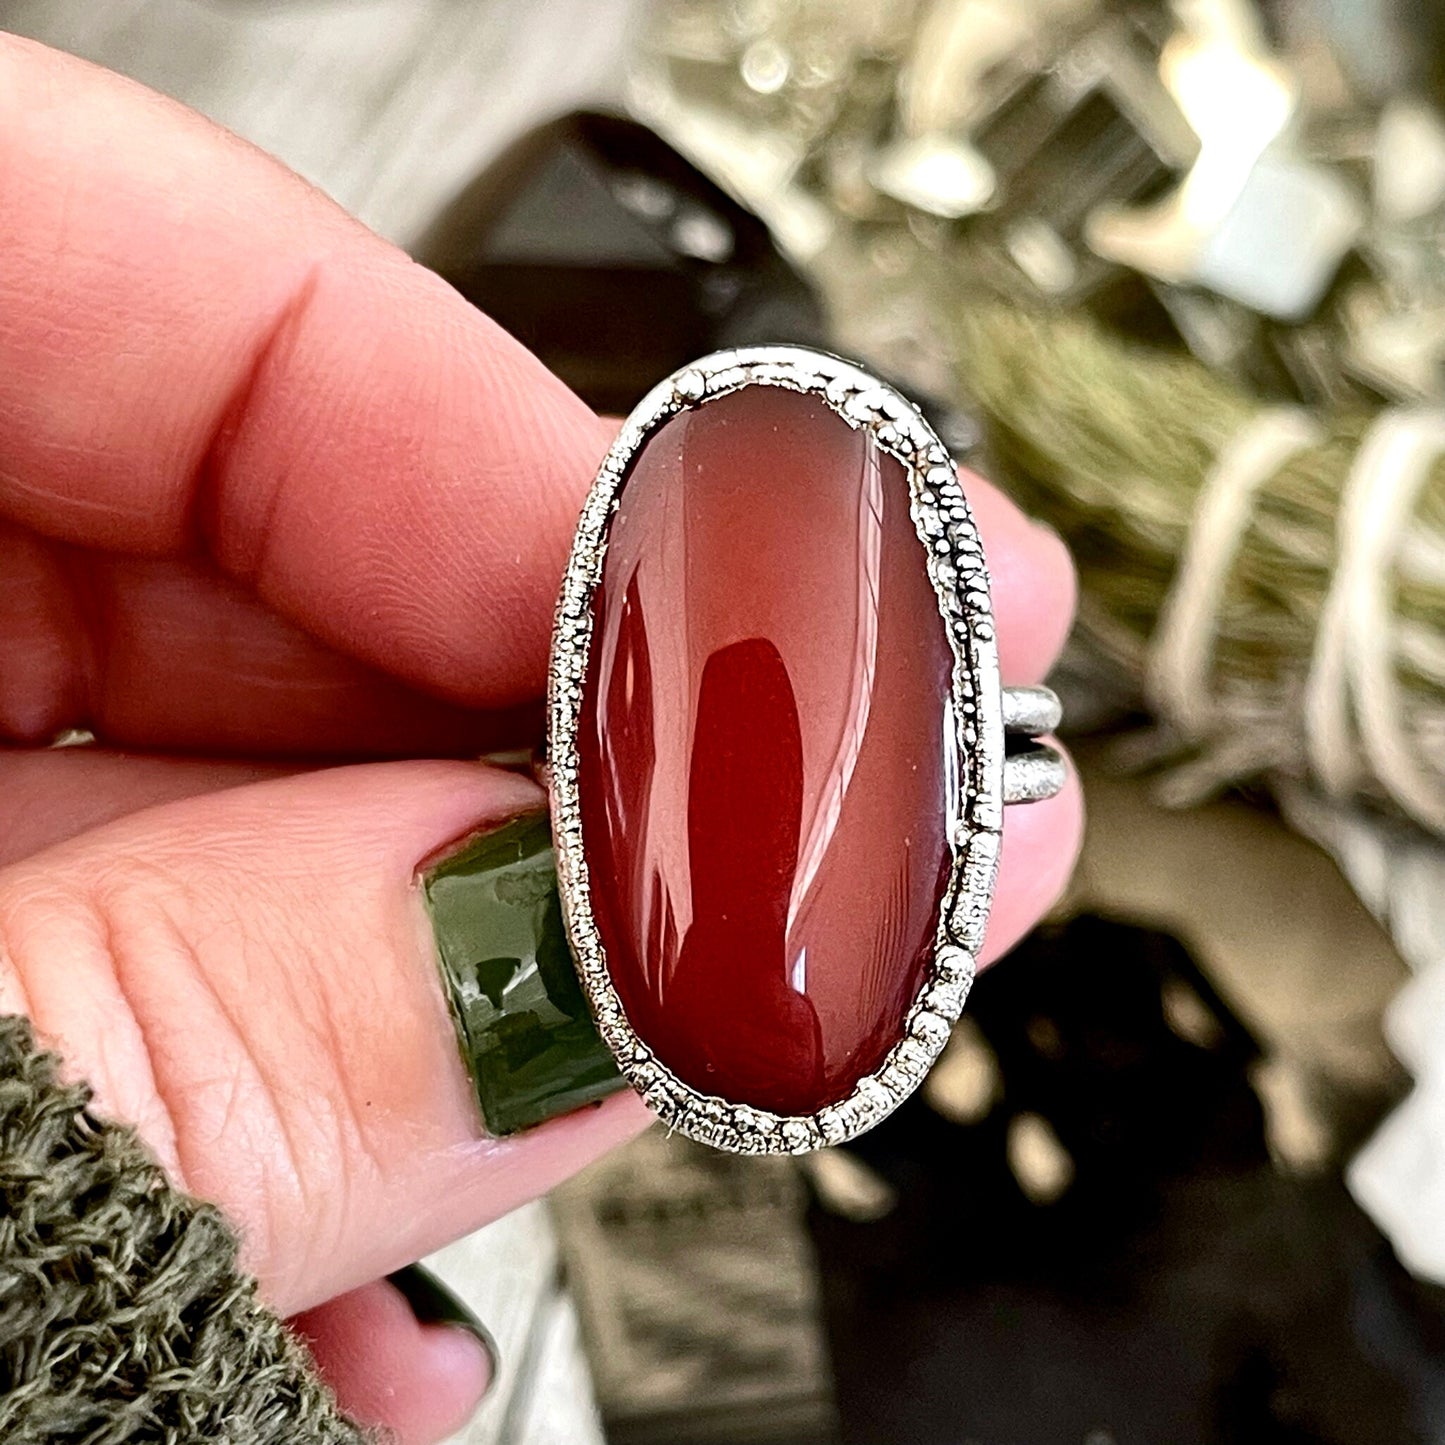 Size 7 Red Carnelian Statement Ring in fine Silver / Foxlark Collection - One of a Kind - Foxlark Crystal Jewelry